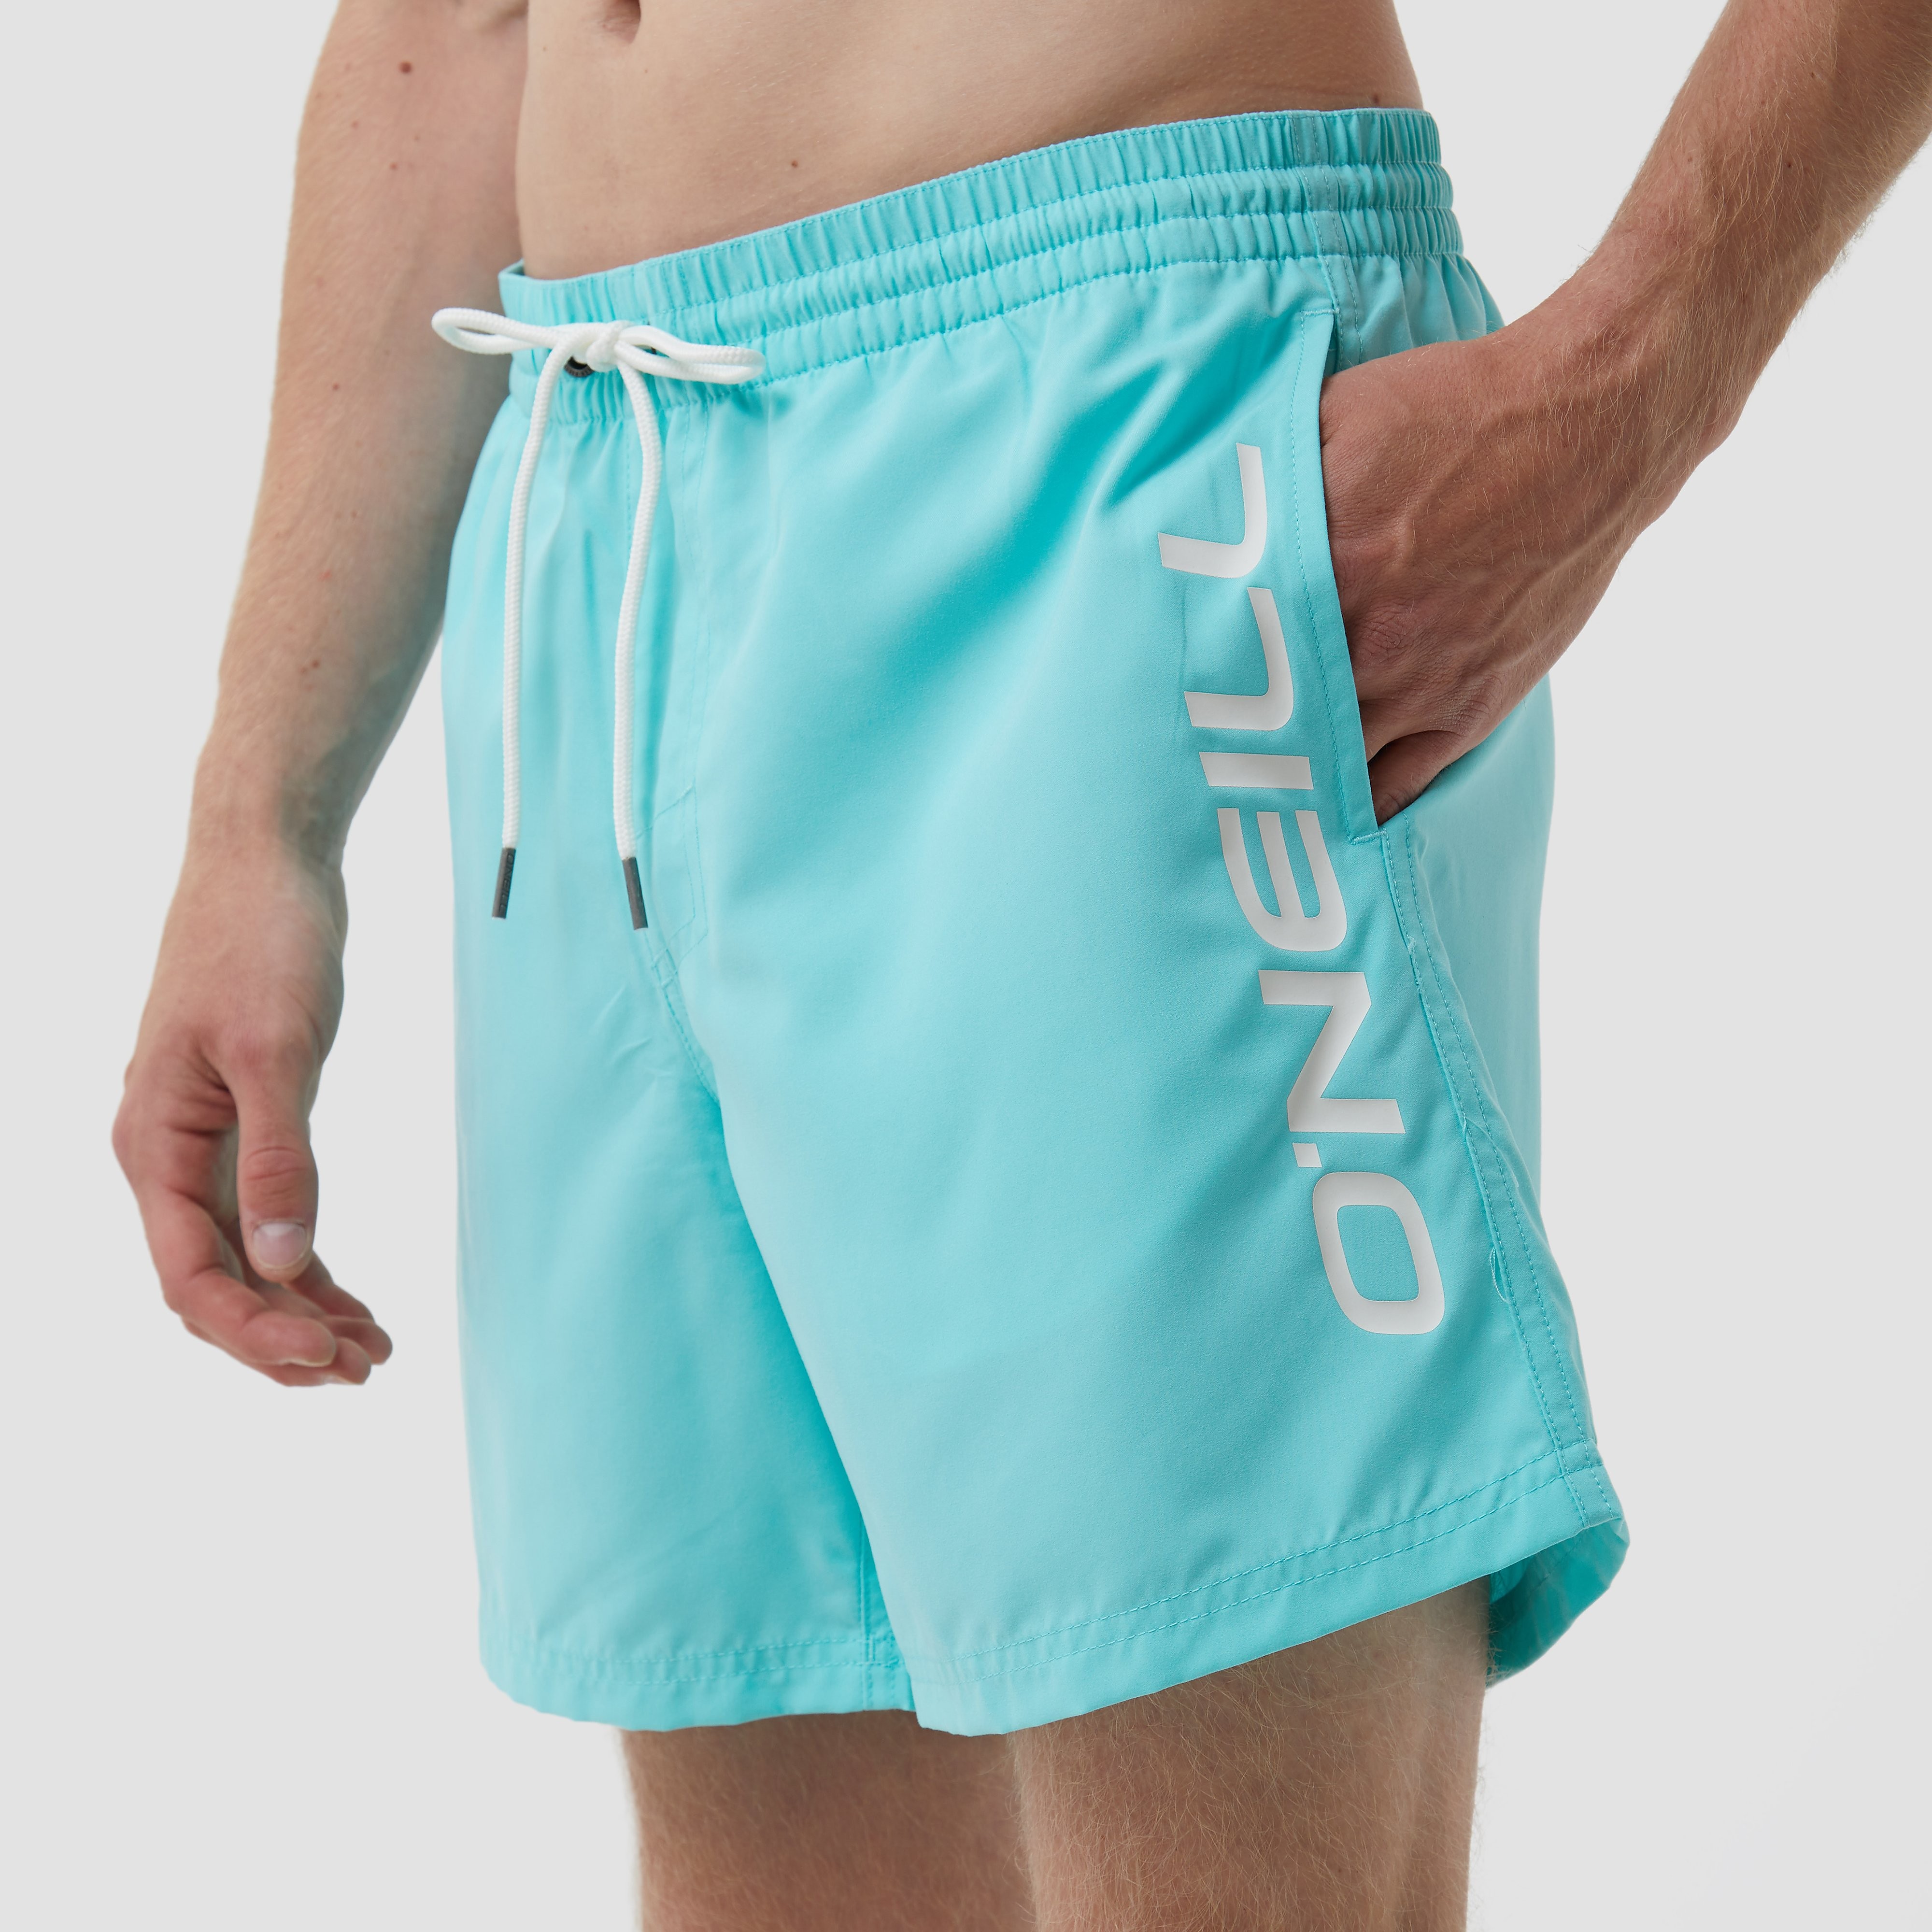 O'Neill Zwembroek Men Cali Aqua Spalsh L - Aqua Spalsh 50% Gerecycled Polyester (Repreve), 50% Polyester Null